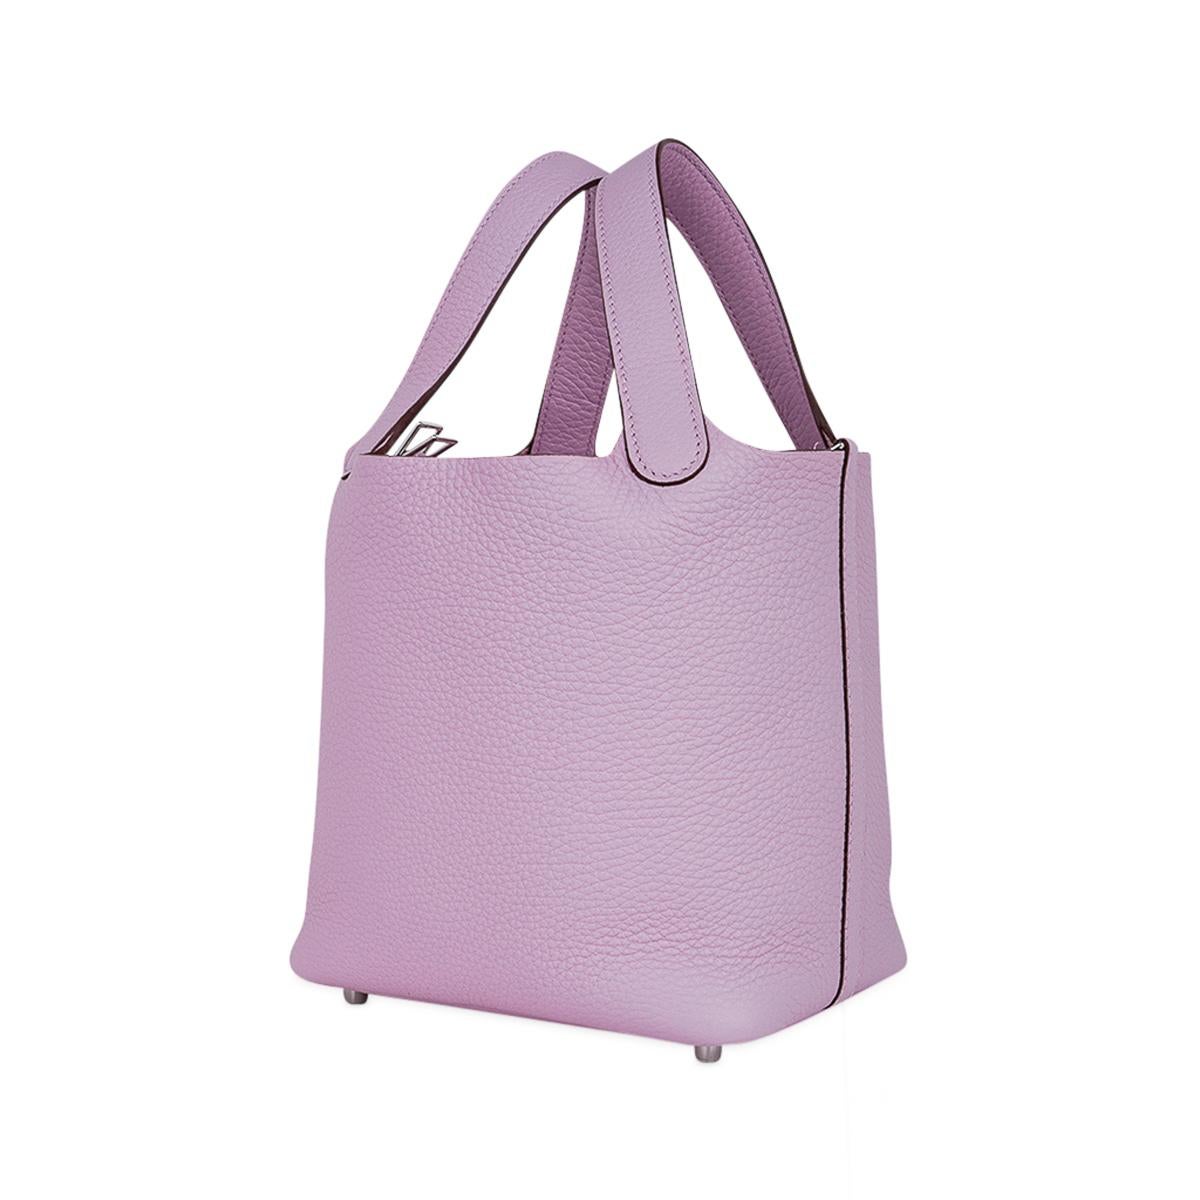 Hermes Lock 18 Mauve Sylvestre Bag Palladium Hardware Clemence Leather In New Condition For Sale In Miami, FL